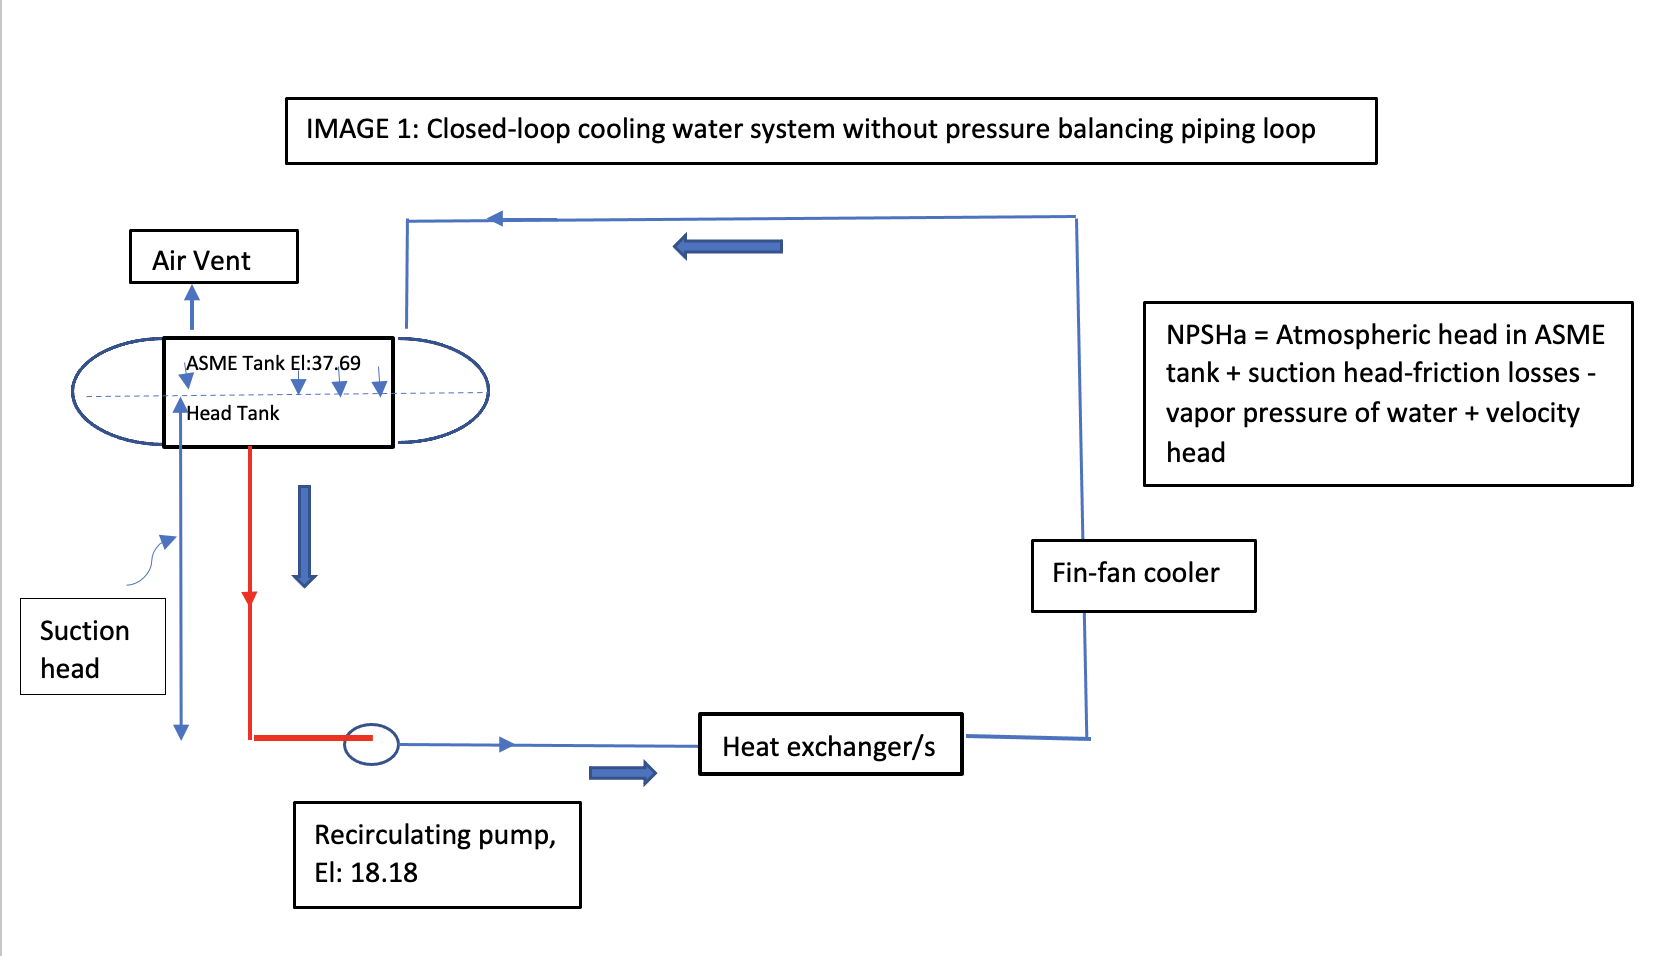 IMAGE 1: Closed-loop cooling water system without pressure balancing piping loop